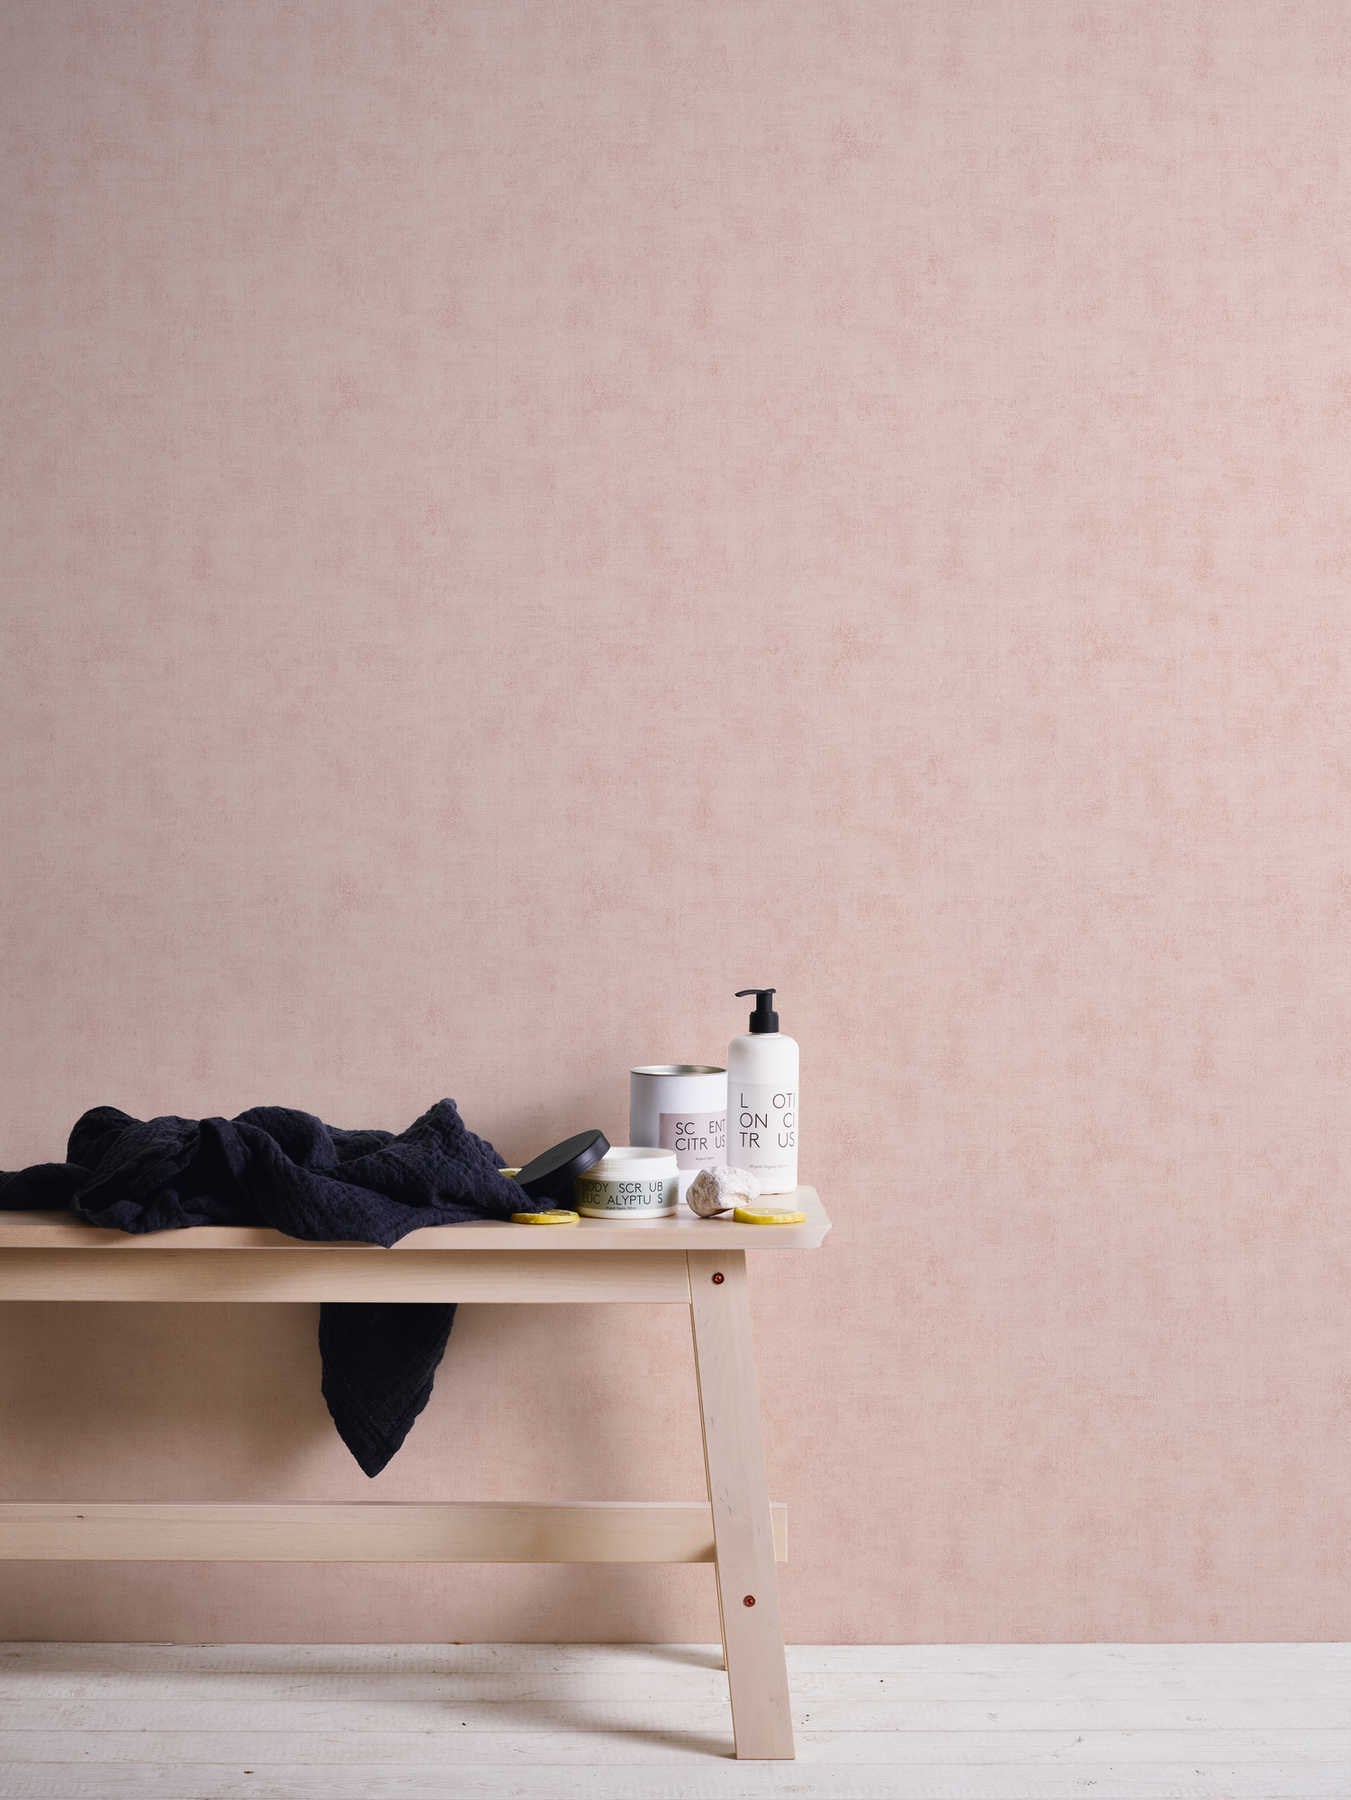             Wallpaper with discreet structure design - pink
        